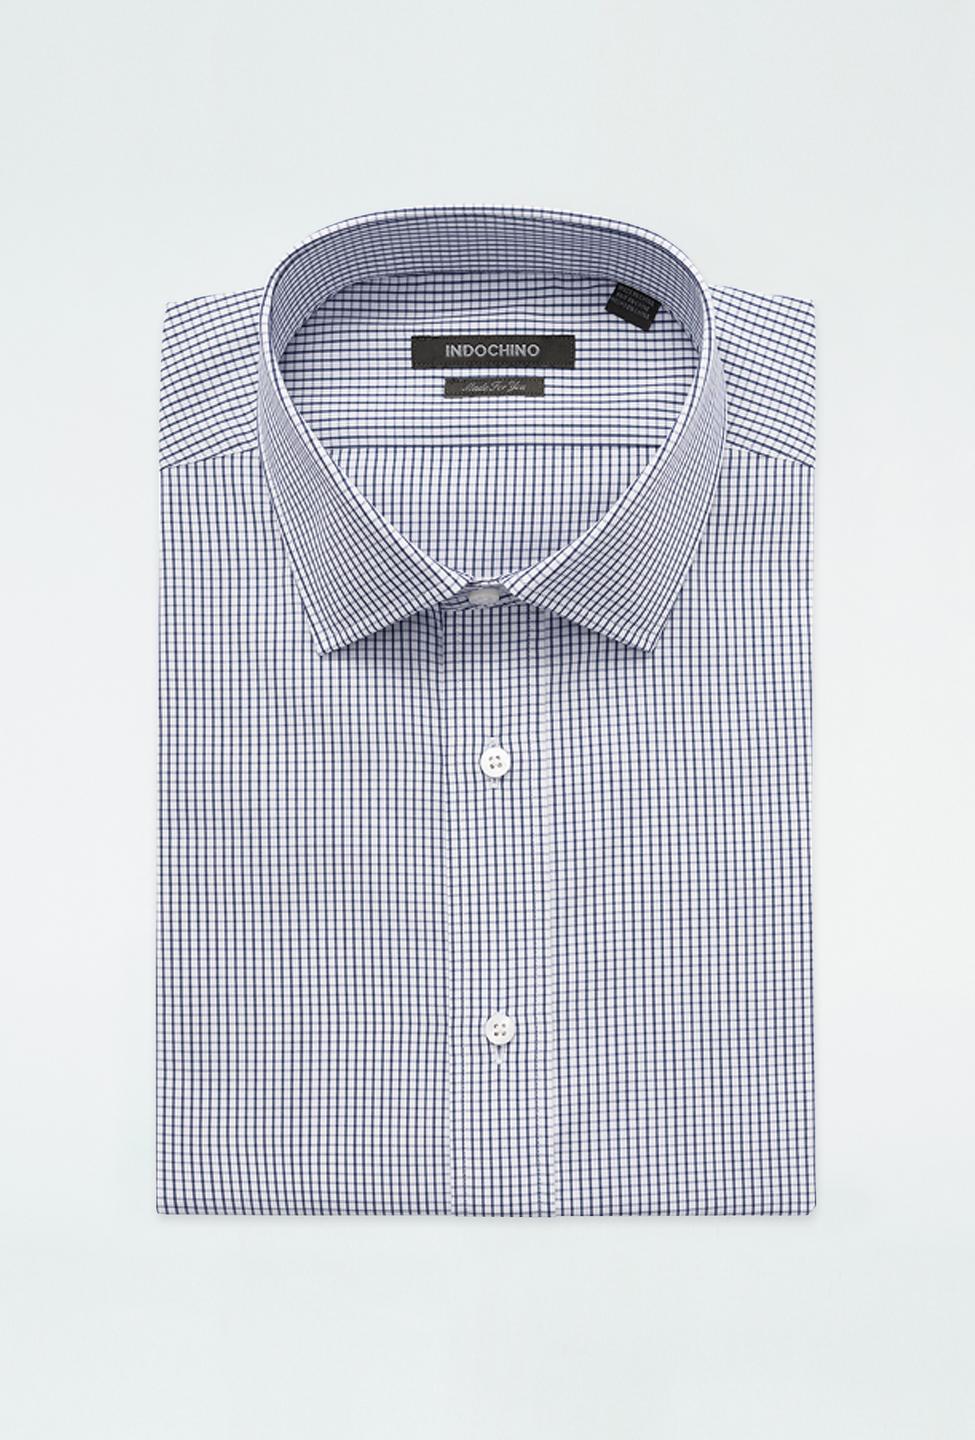 Black shirt - Harlow Checked Design from Premium Indochino Collection